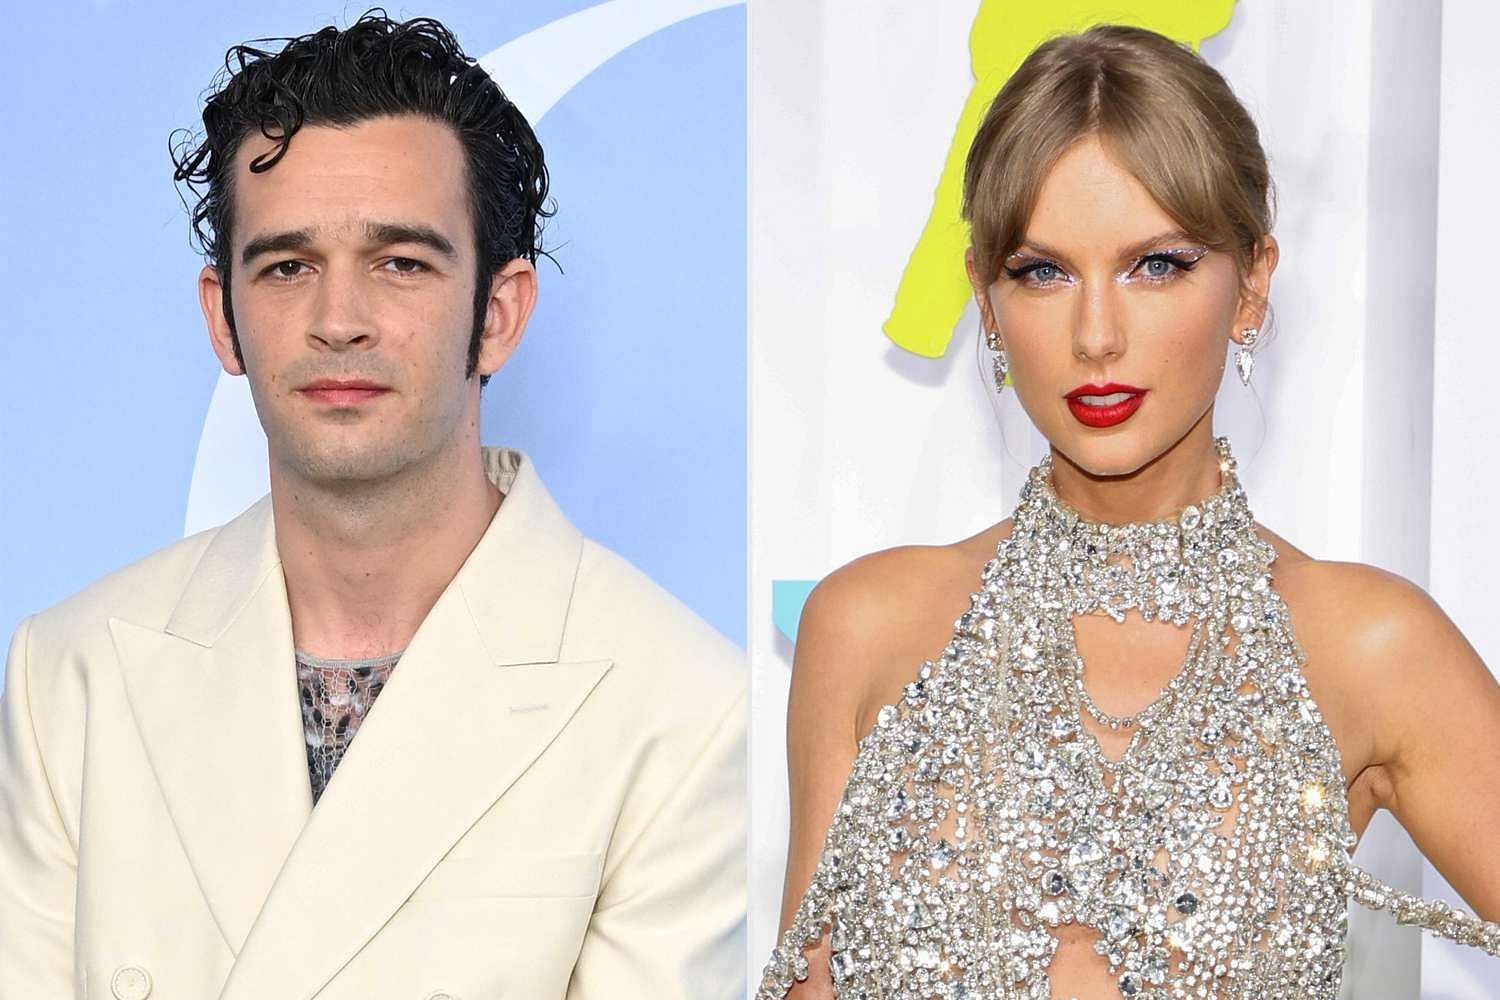 Social media users call out Matty for his racial comments on a podcast in February: Reactions explored. (Image via Getty Images)